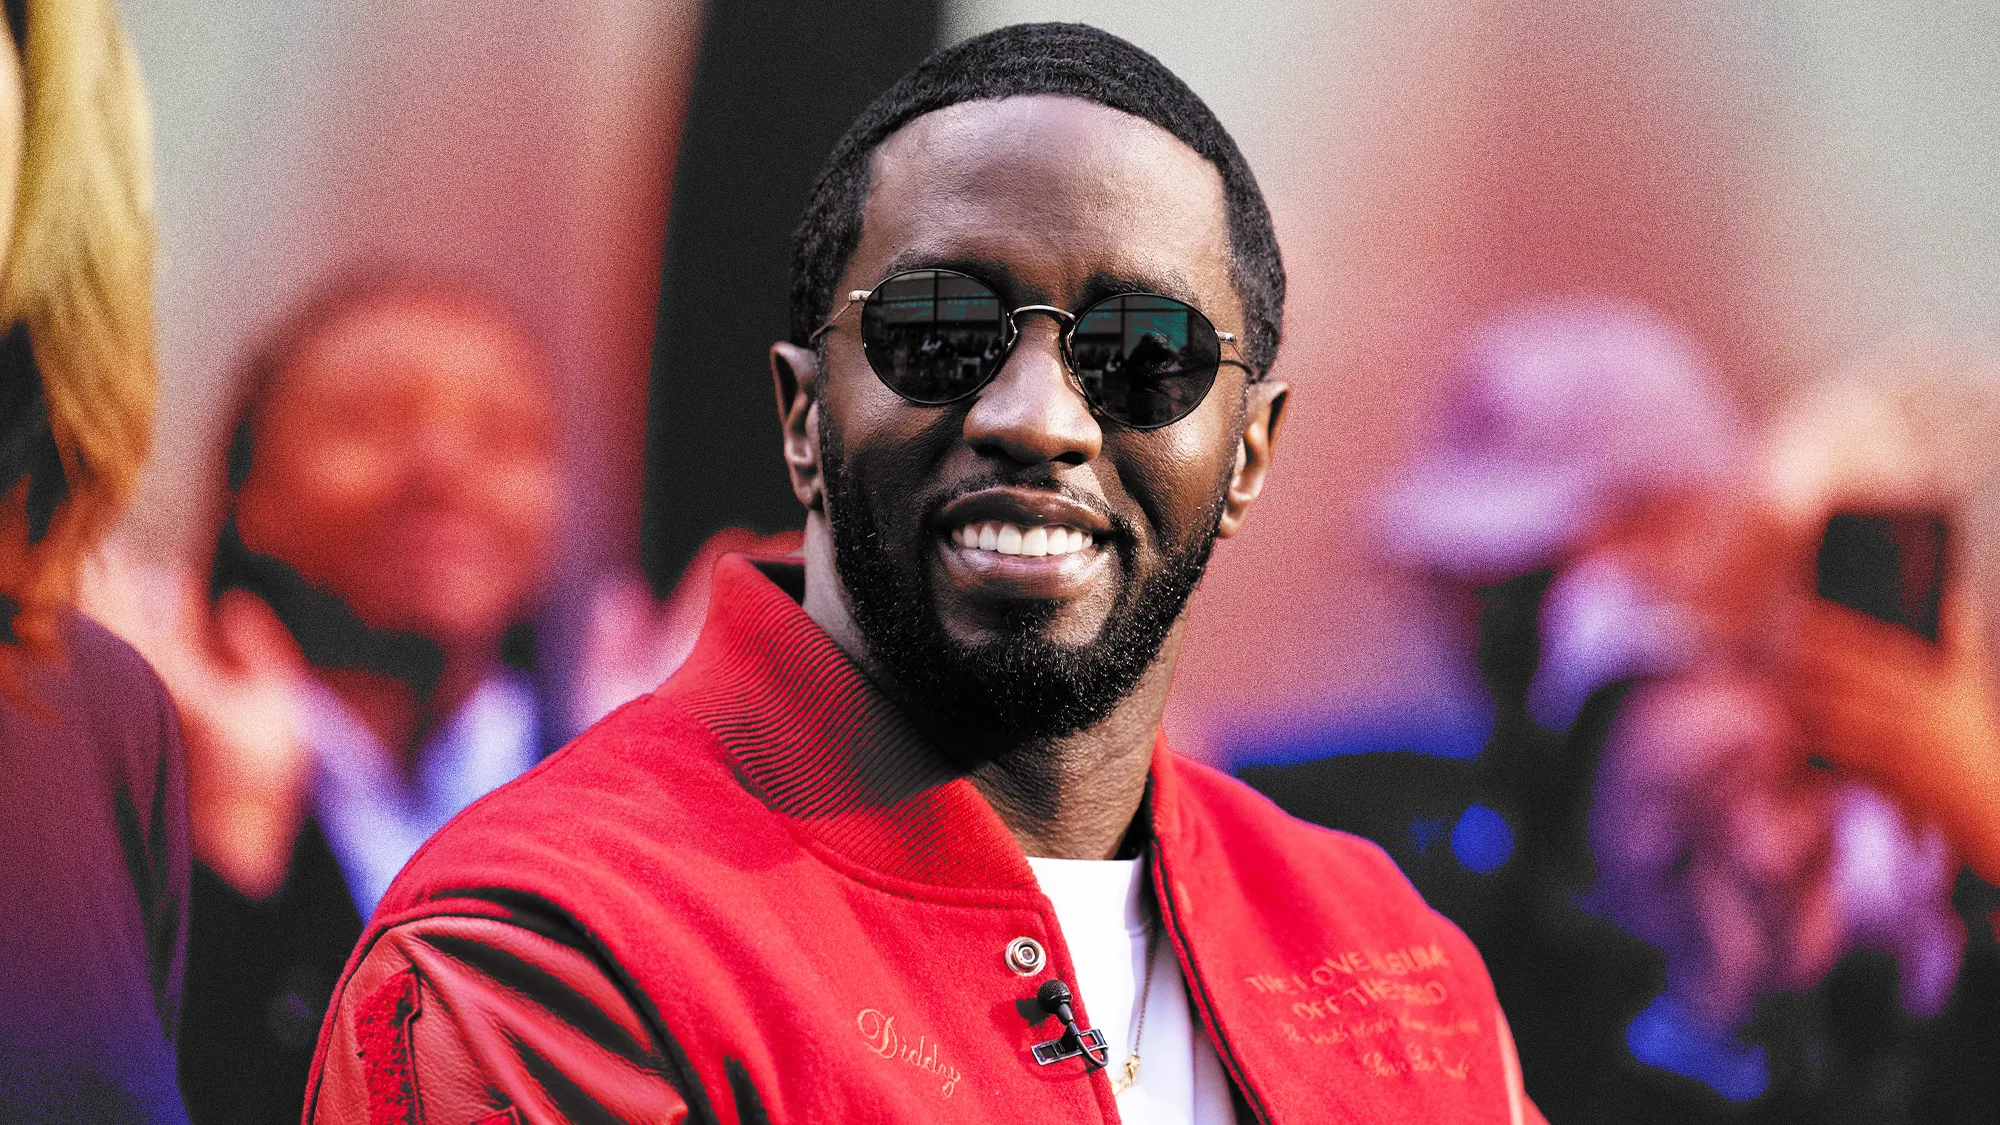 Diddy’s L.A. and Miami Homes Raided by Homeland Security as Part of Sex Trafficking Investigation